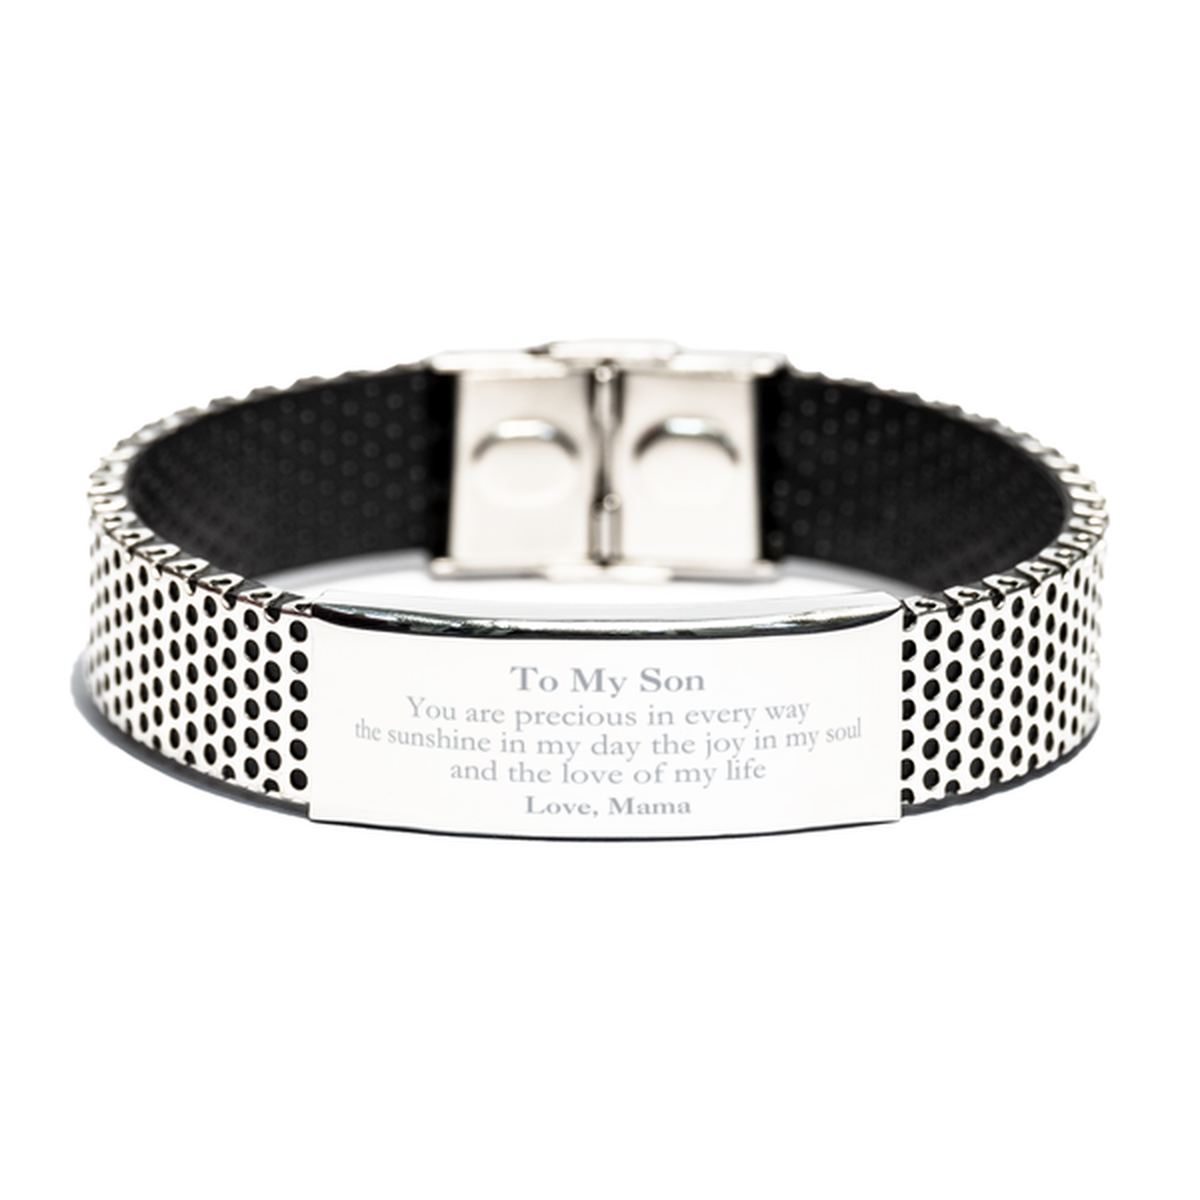 Graduation Gifts for Son Stainless Steel Bracelet Present from Mama, Christmas Son Birthday Gifts Son You are precious in every way the sunshine in my day. Love, Mama